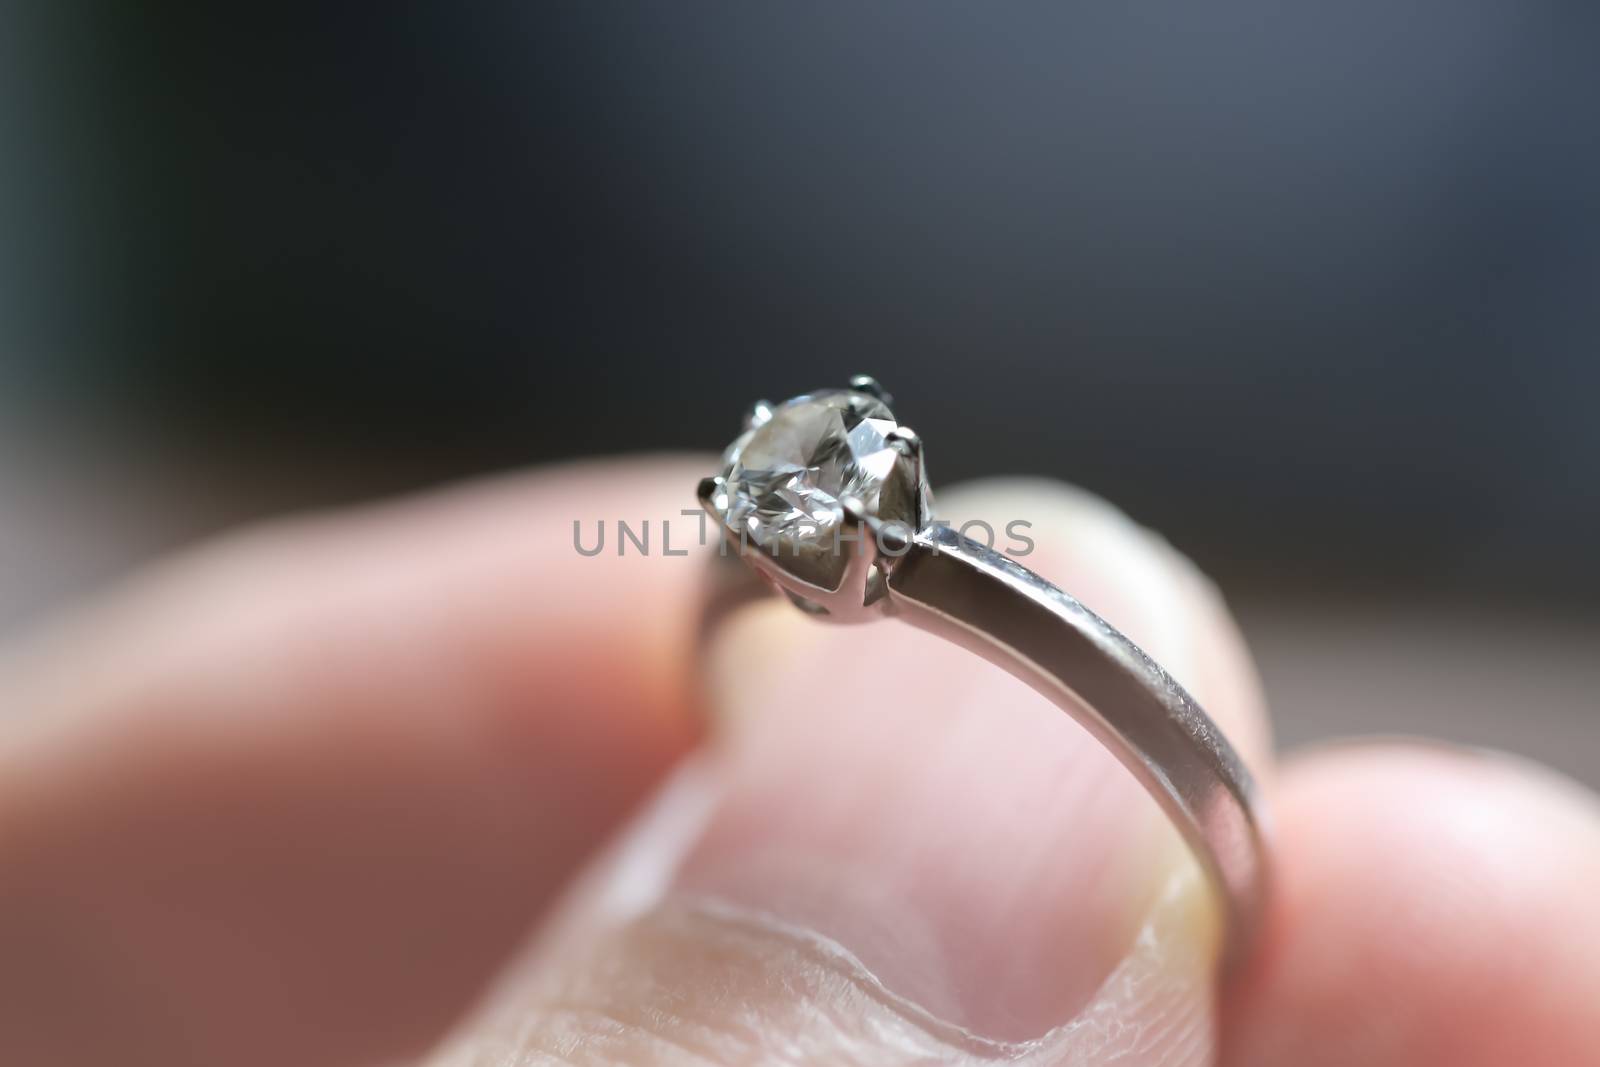 Diamond ring was holding by thumb and finger